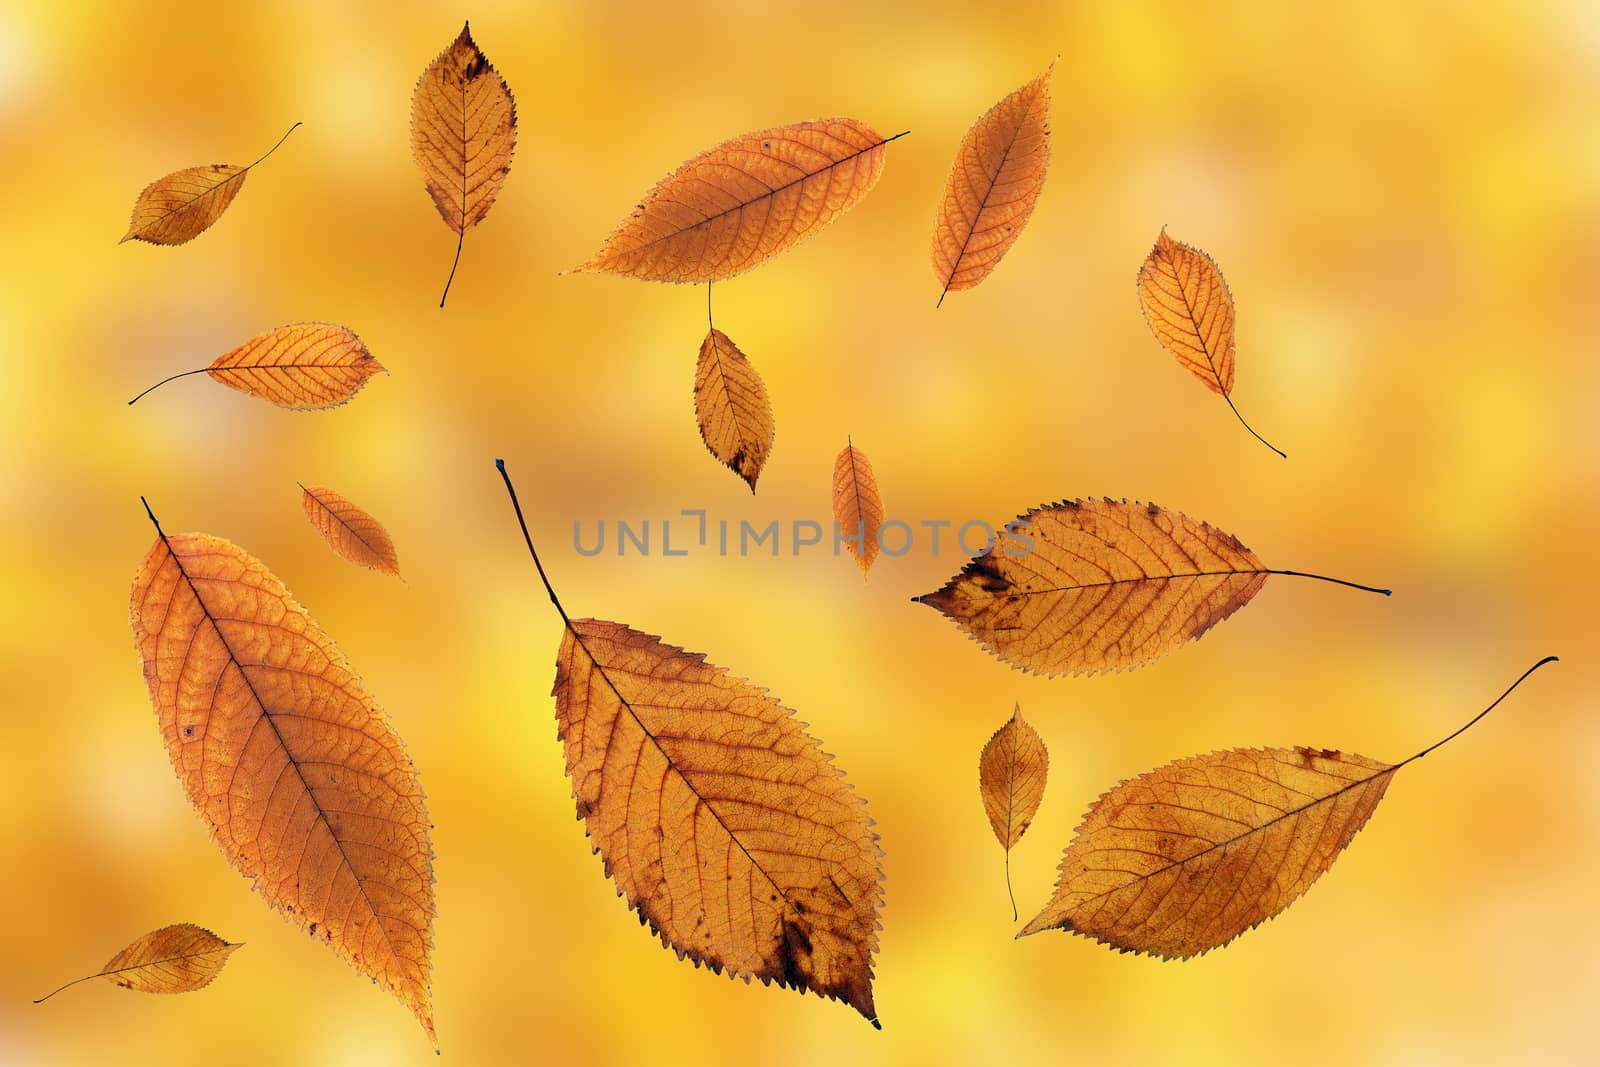 cherry leaves falling on ground over autumn background